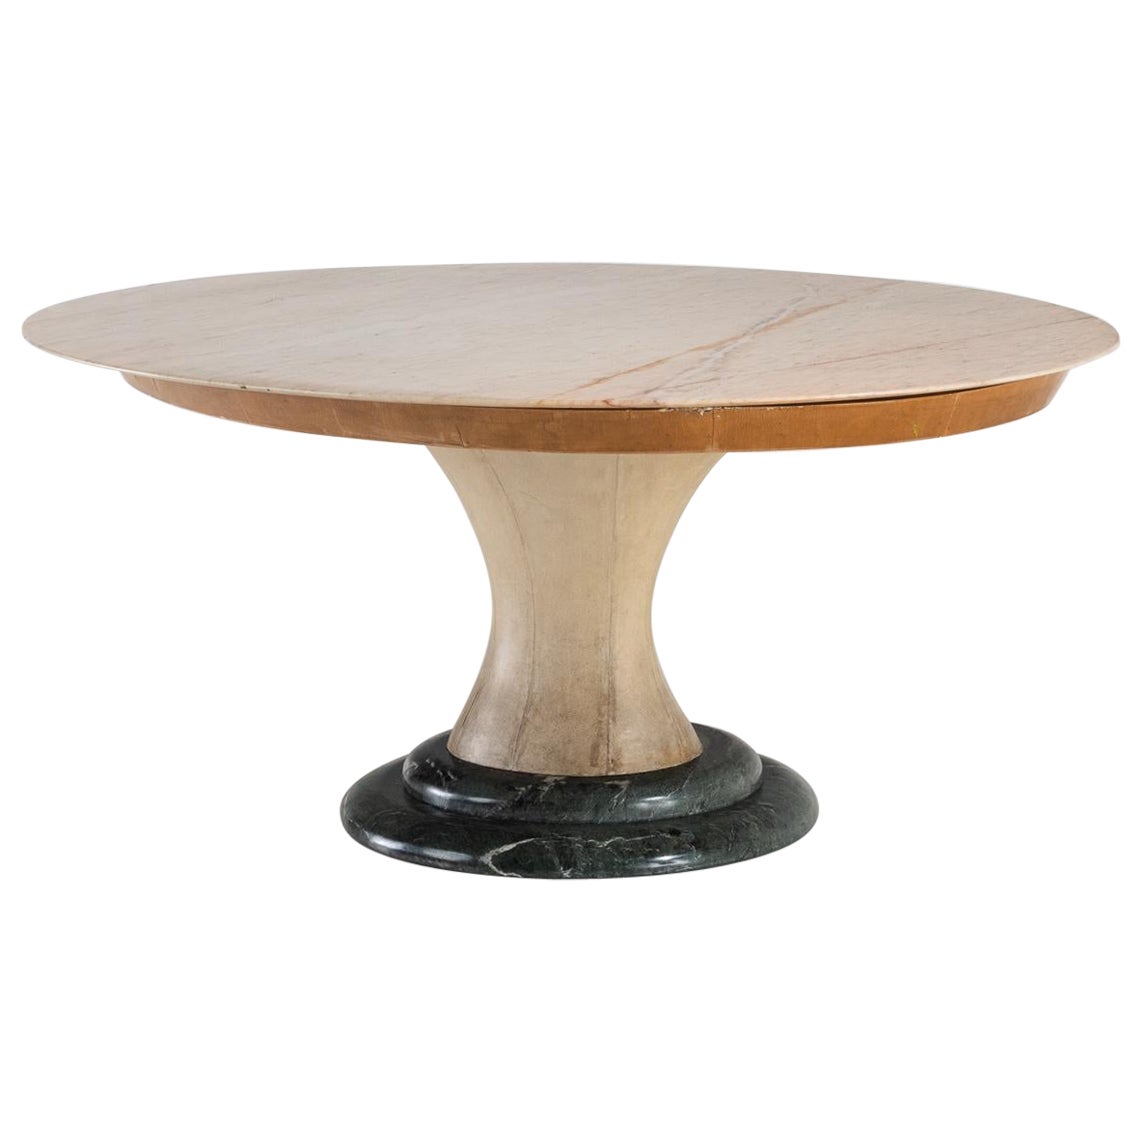 Guglielmo Ulrich Parchemin table with marble top. Italian design 1940s For Sale